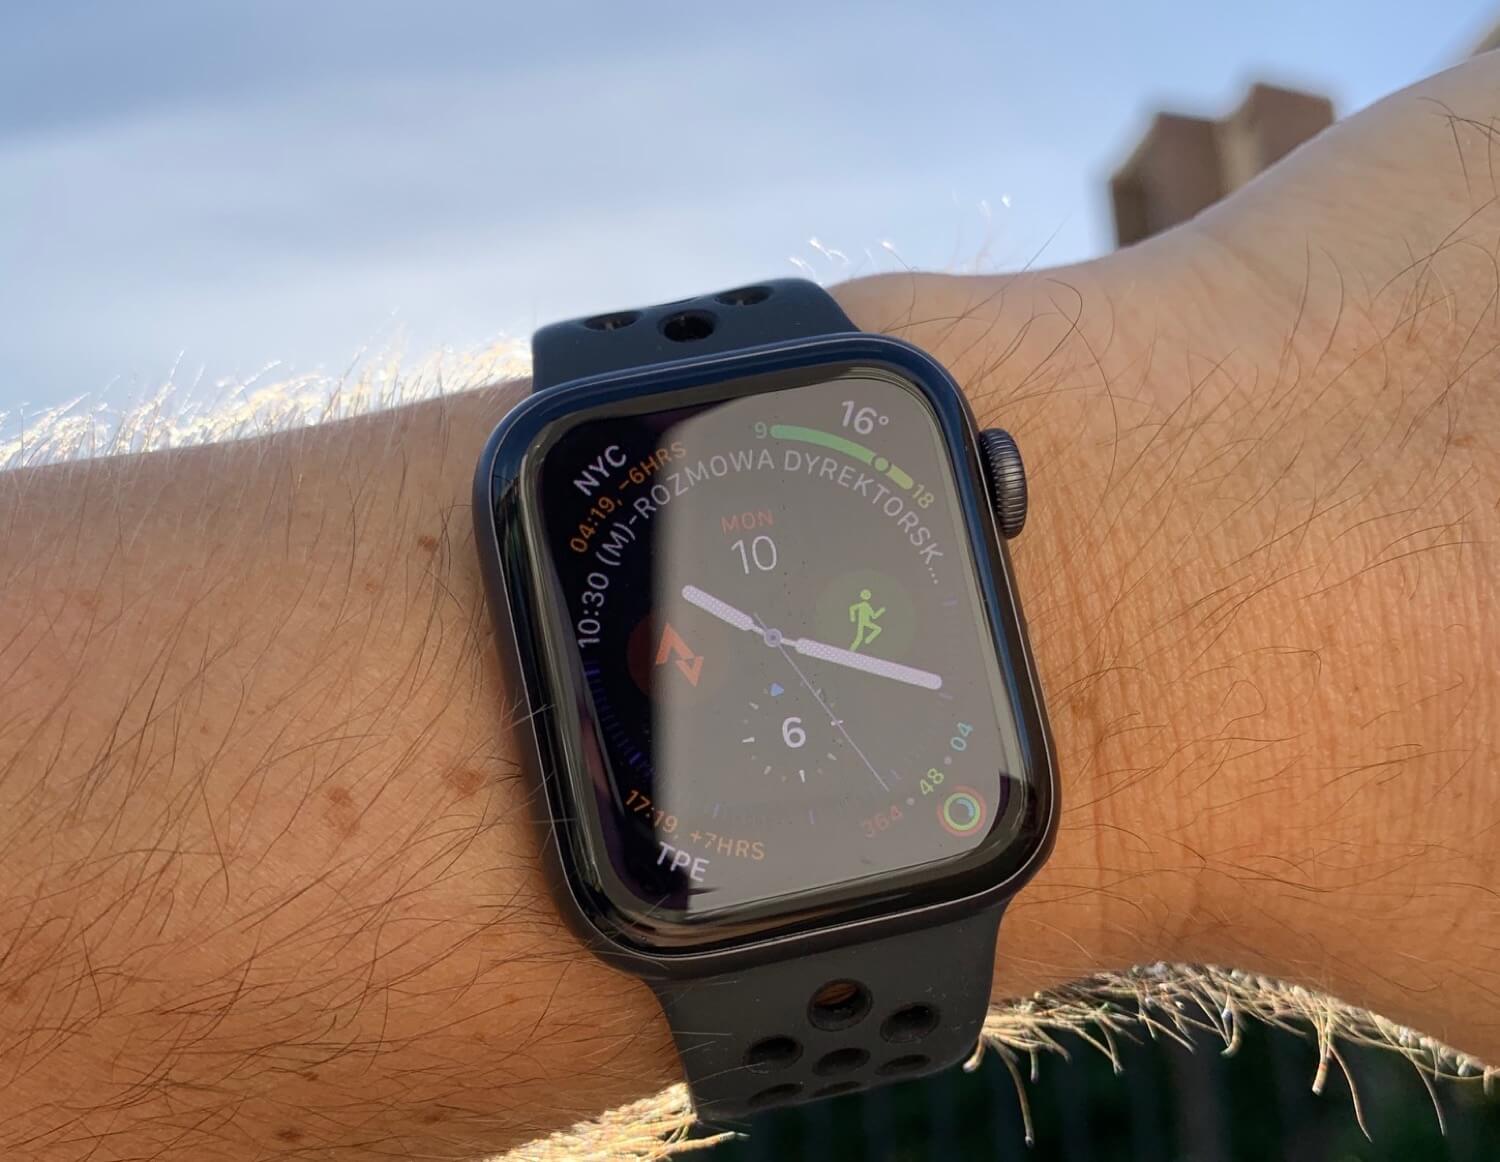 5 things I love about the Apple Watch series 4 after just a day of using it!